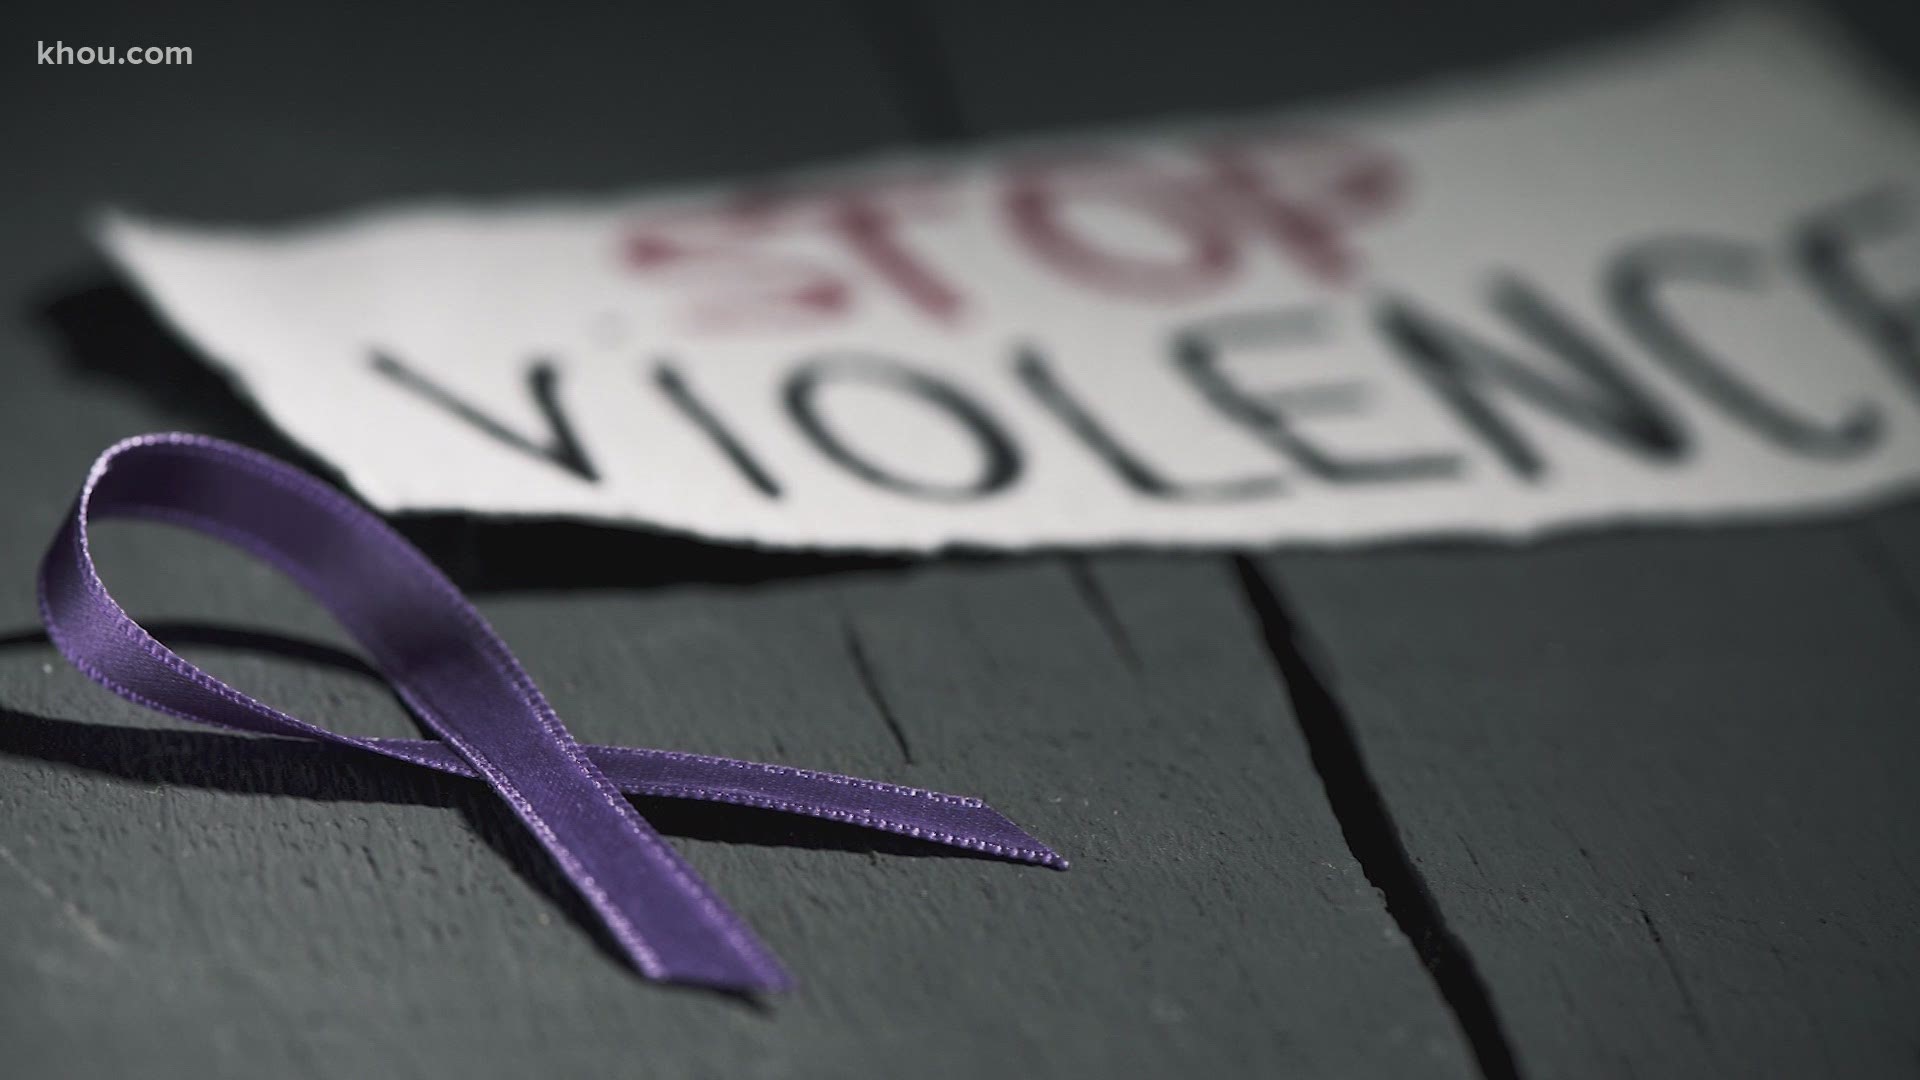 Domestic violence magnified by pandemic and holidays